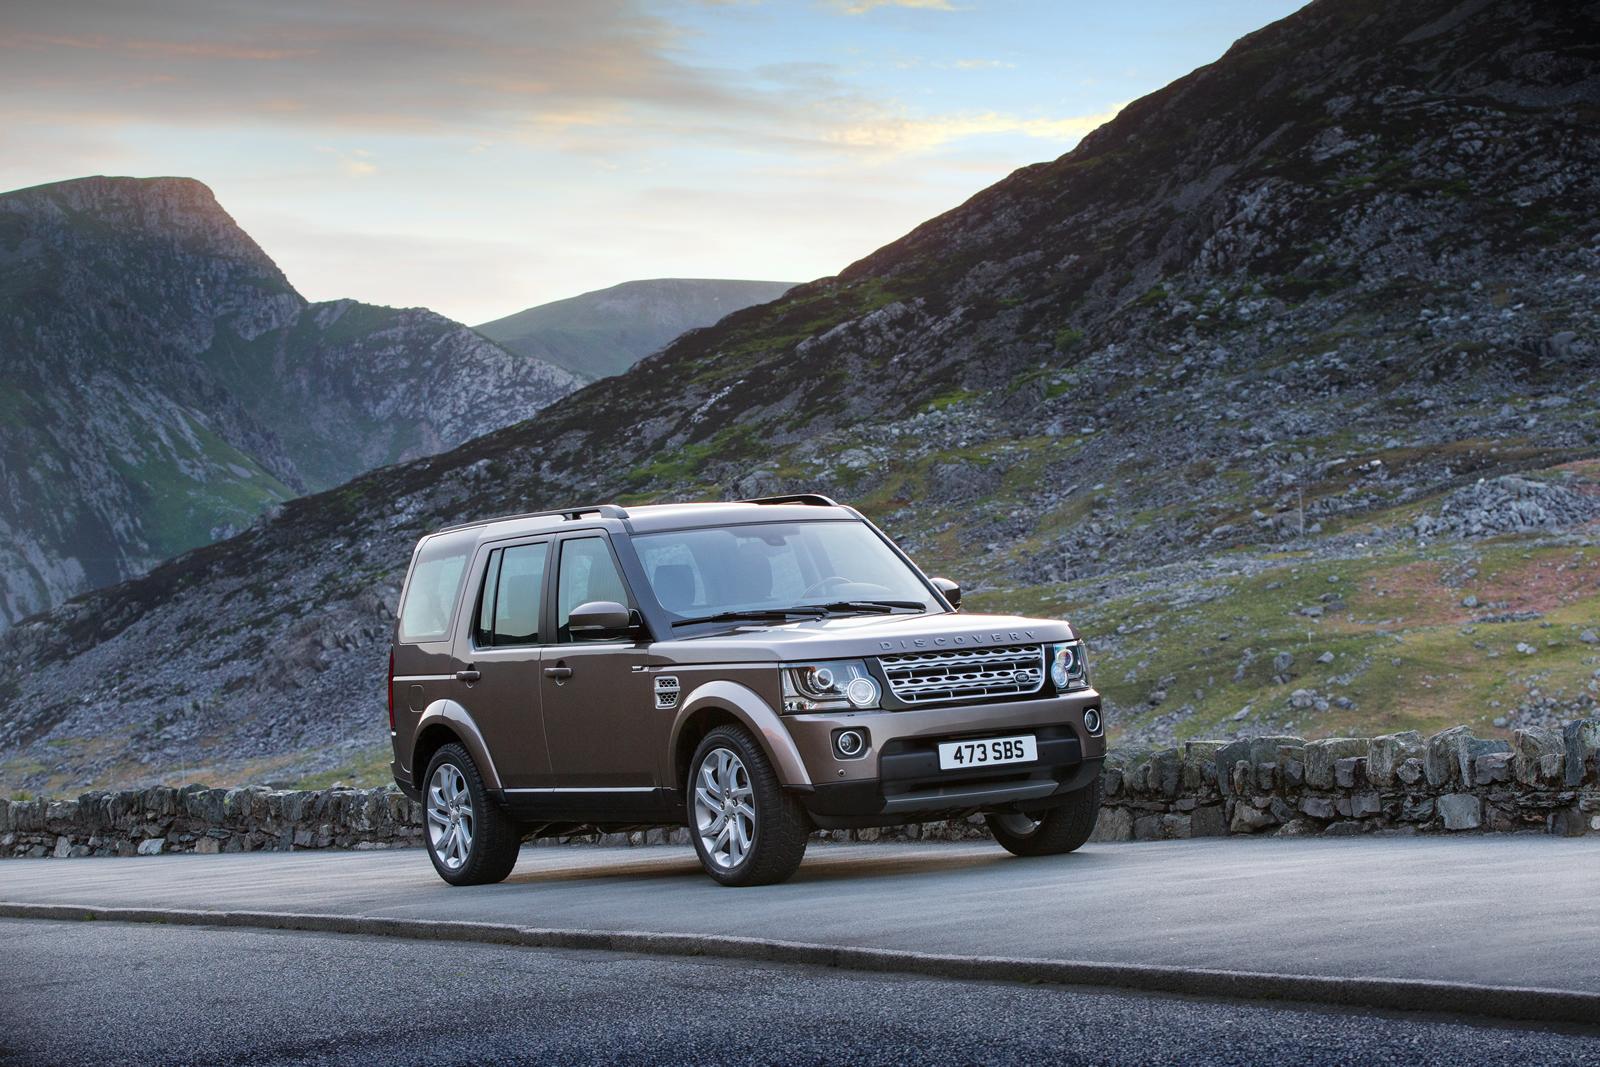 Used 2020 Black Land Rover Discovery for sale | PistonHeads